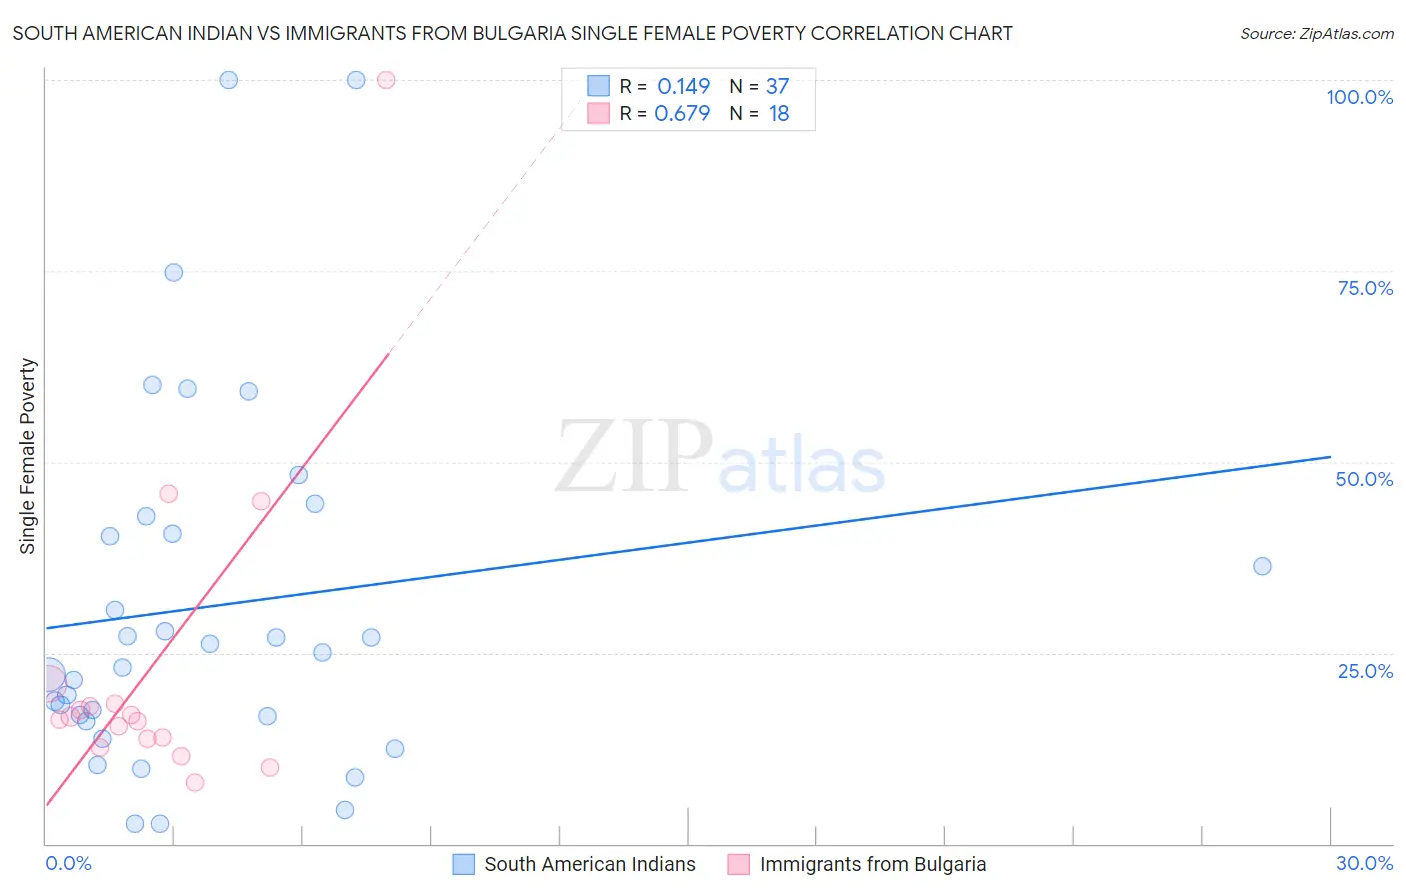 South American Indian vs Immigrants from Bulgaria Single Female Poverty